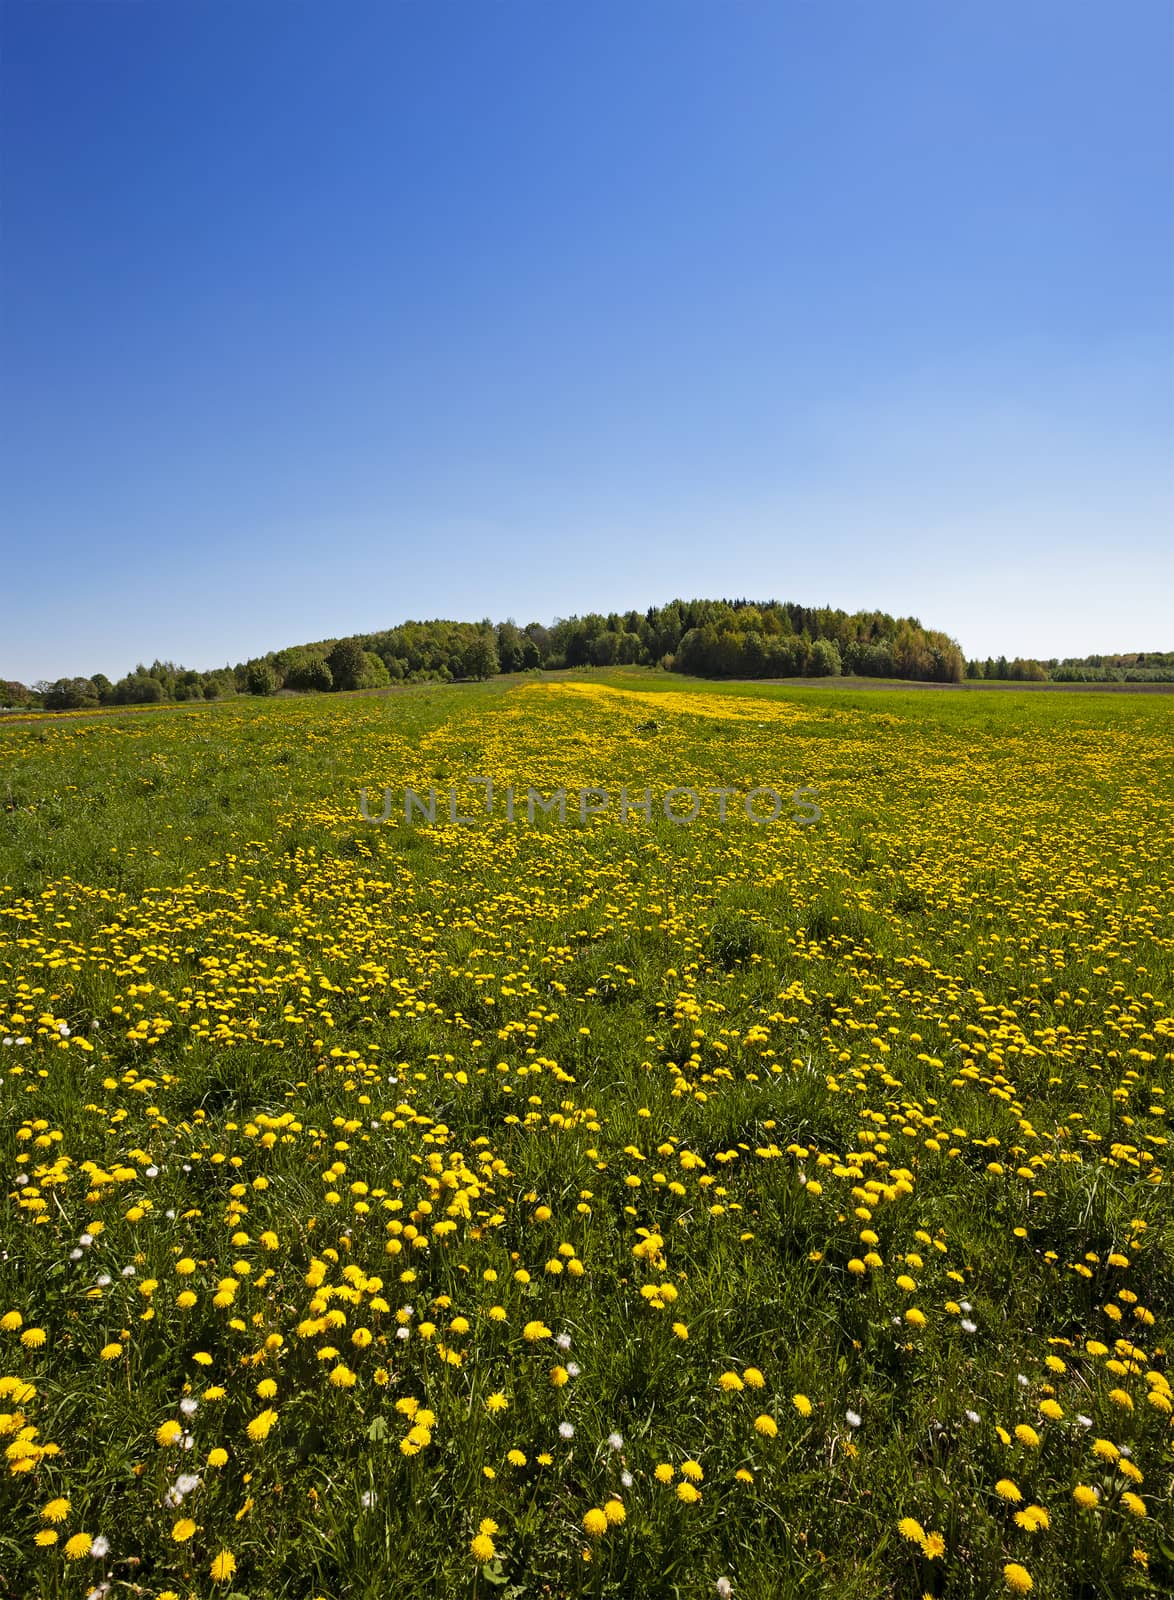  agriculture field where a large number of flowering dandelions. Blue sky.